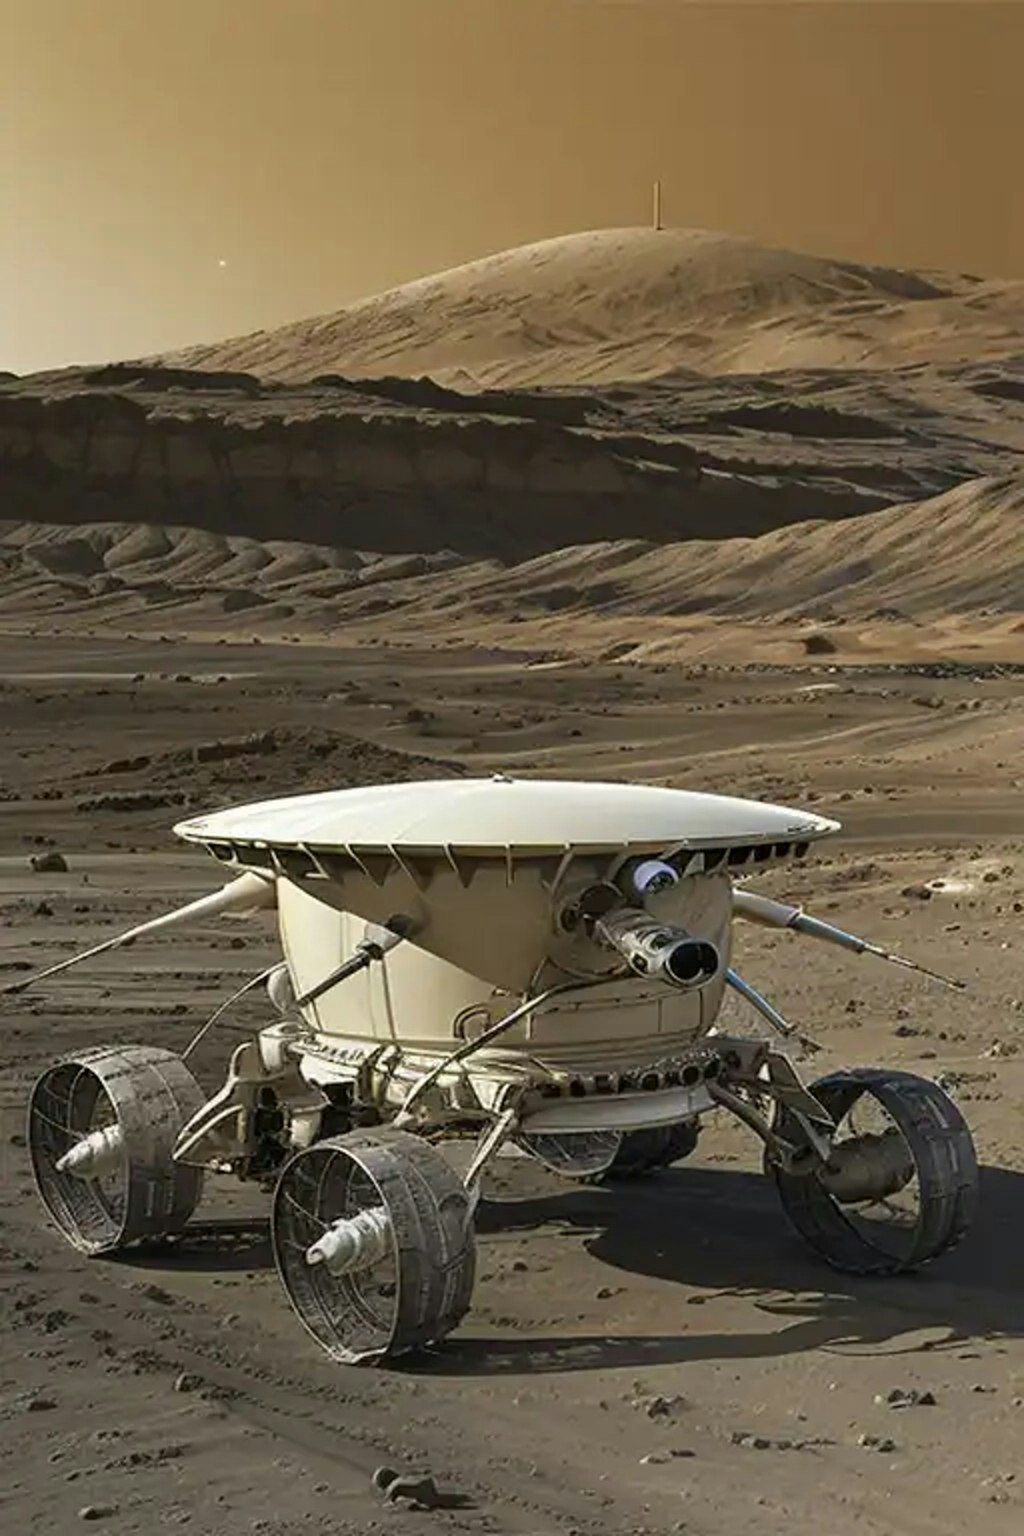 A rover takes some pictures on the surface of Mars